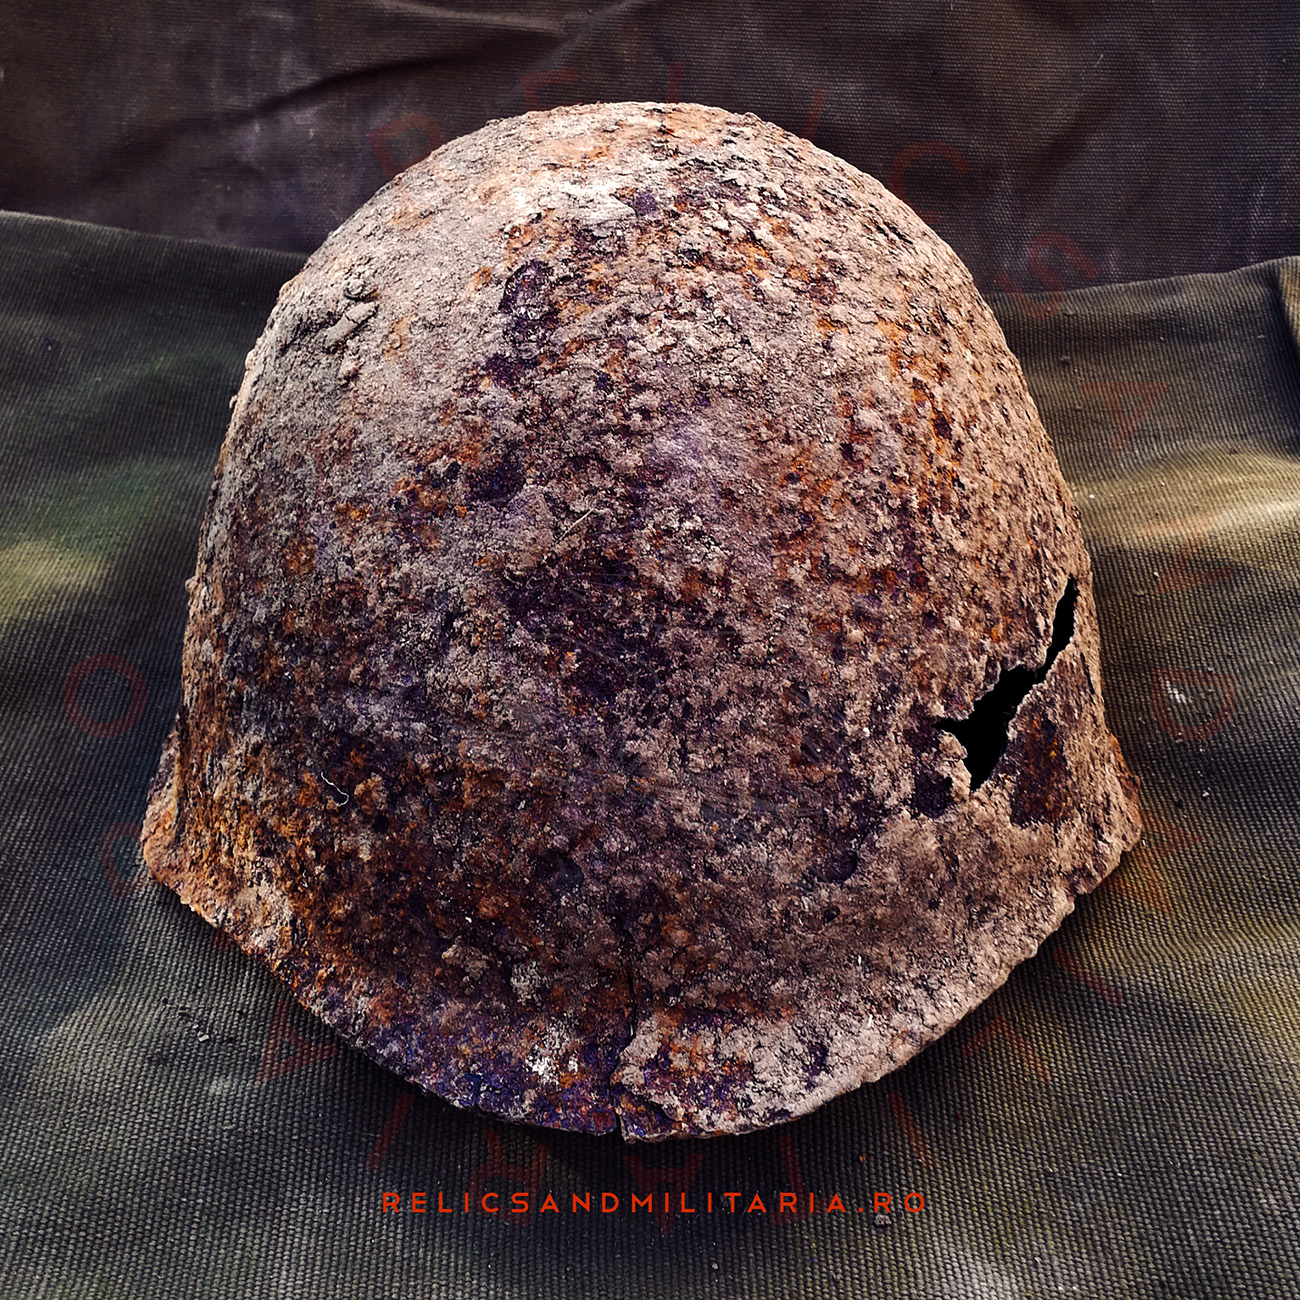 Cleaning rust from relic helmet 